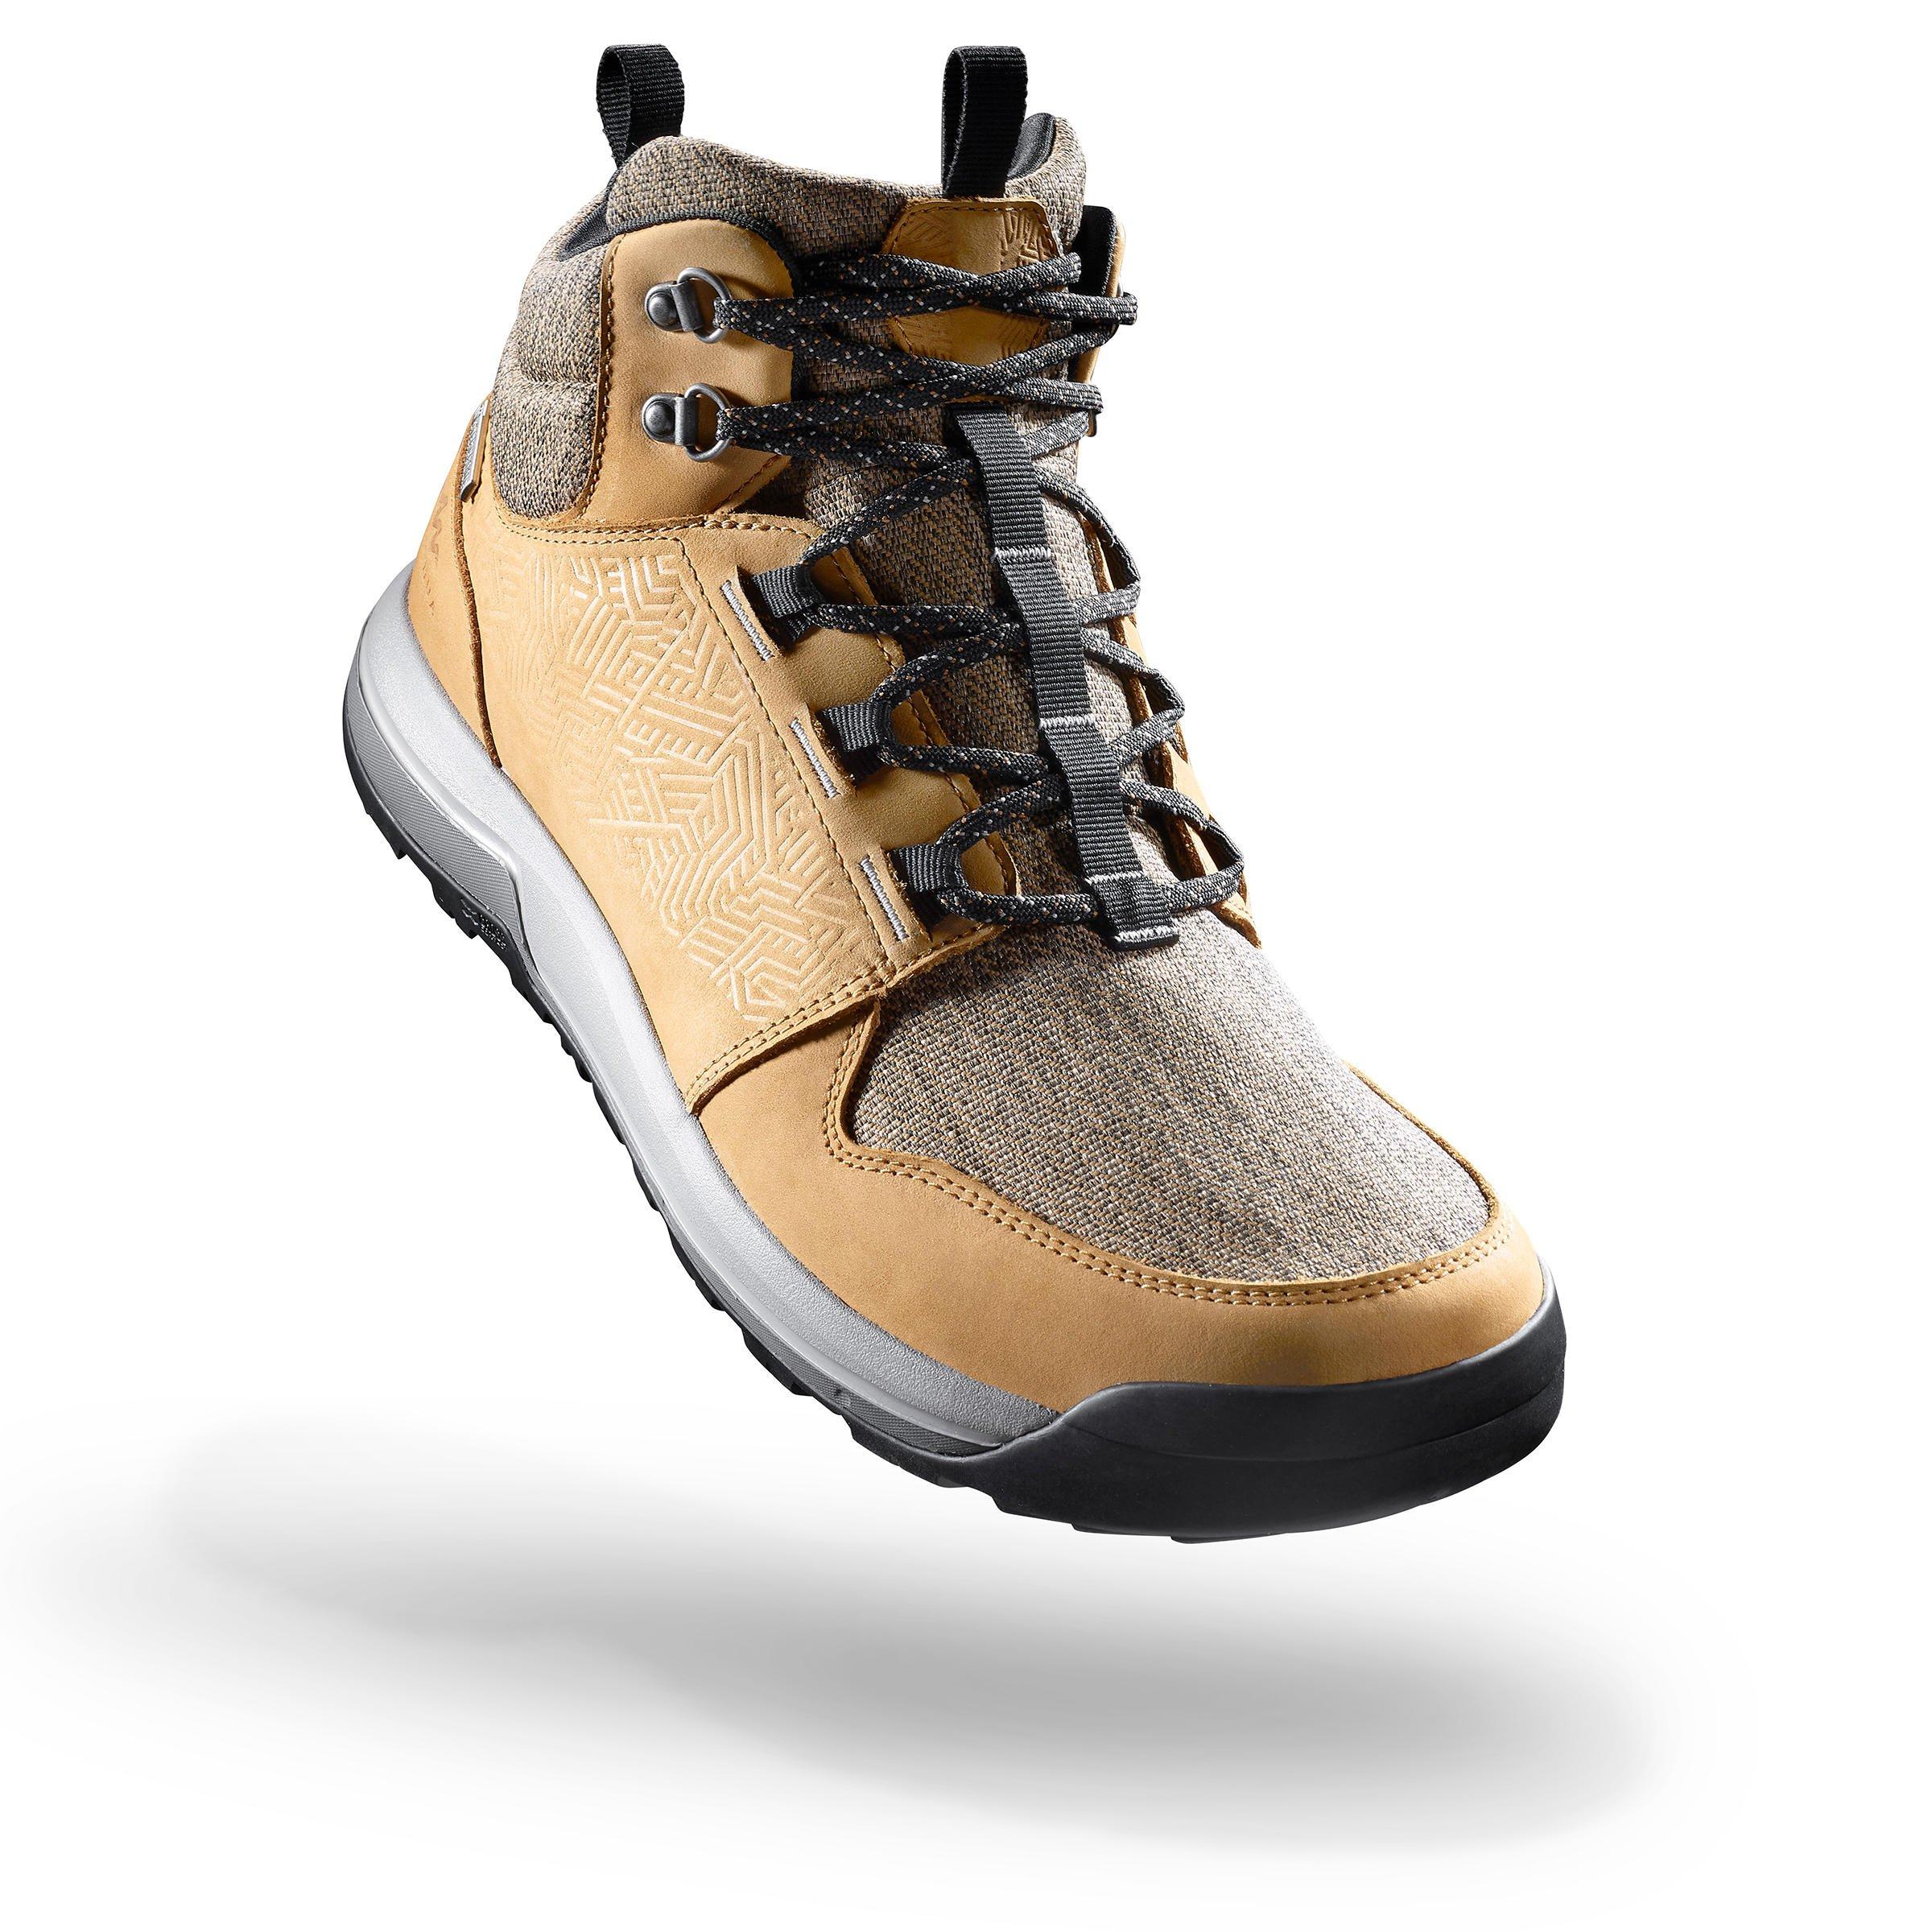 QUECHUA  Chaussures - NH500 MID WP 